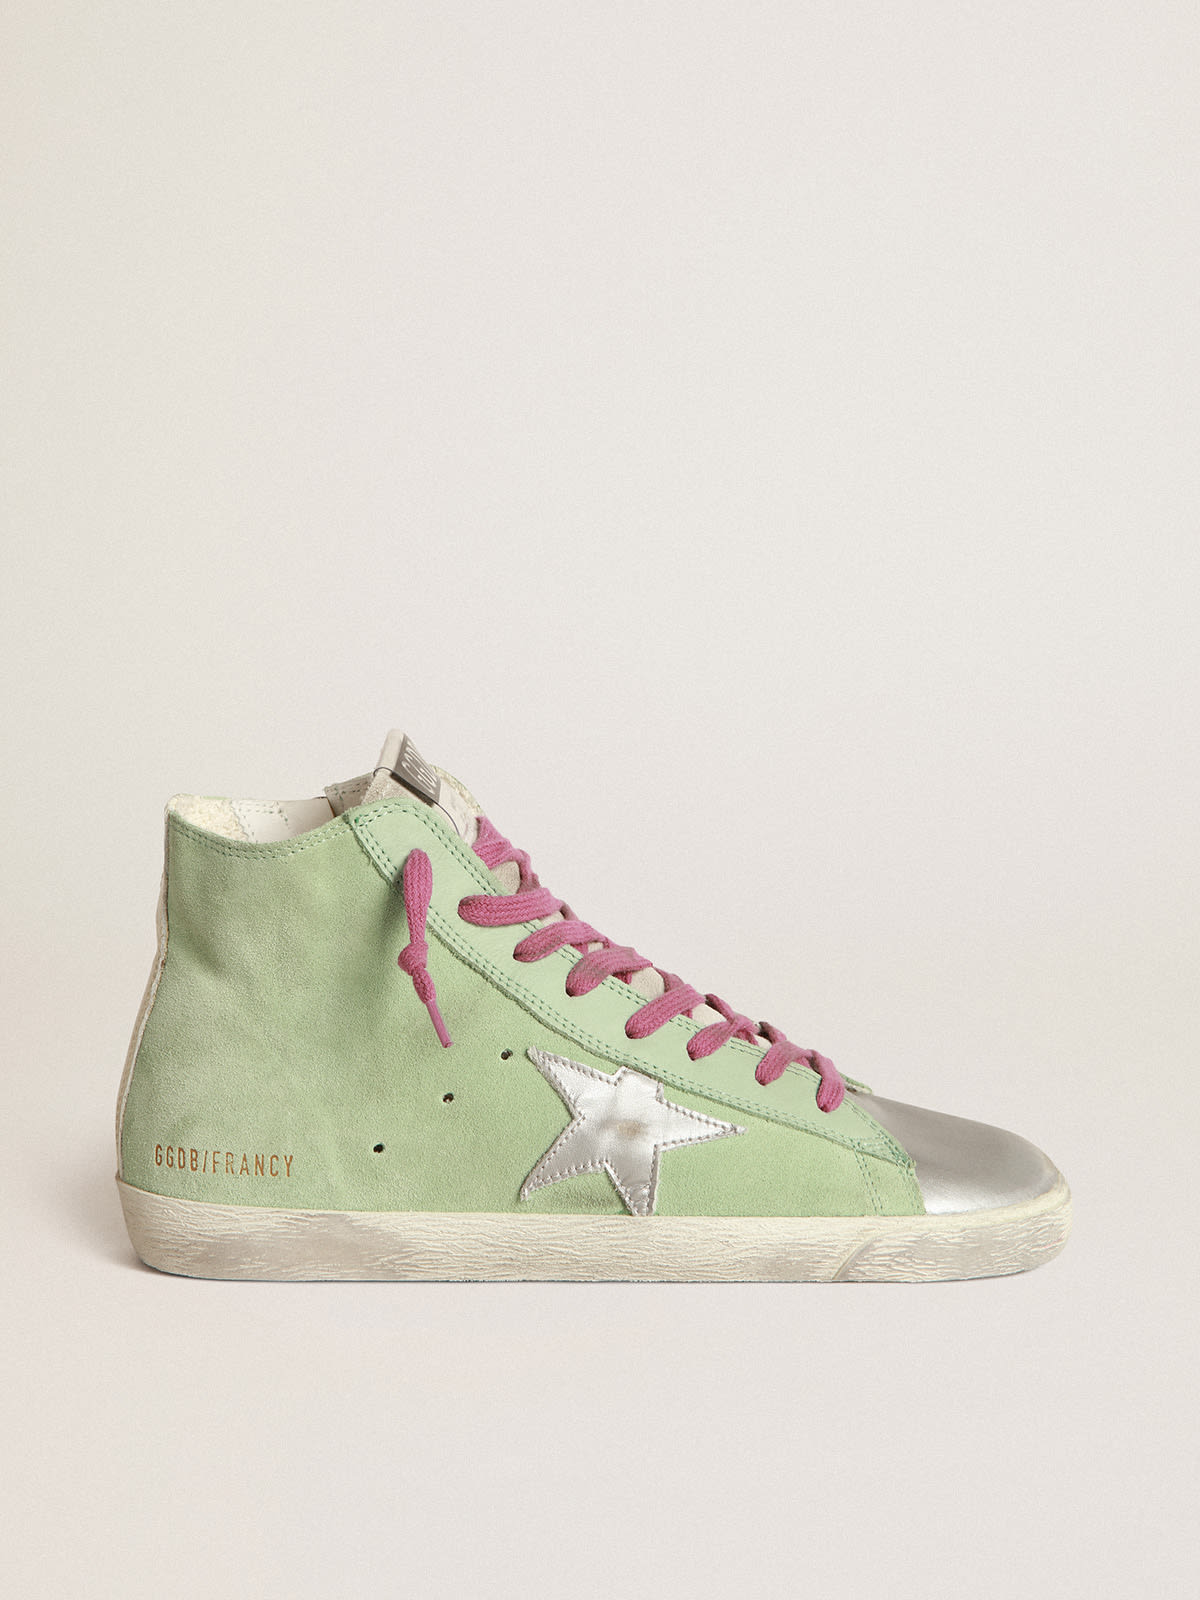 Golden Goose - Francy sneakers in leather with crackle effect star and heel tab in 